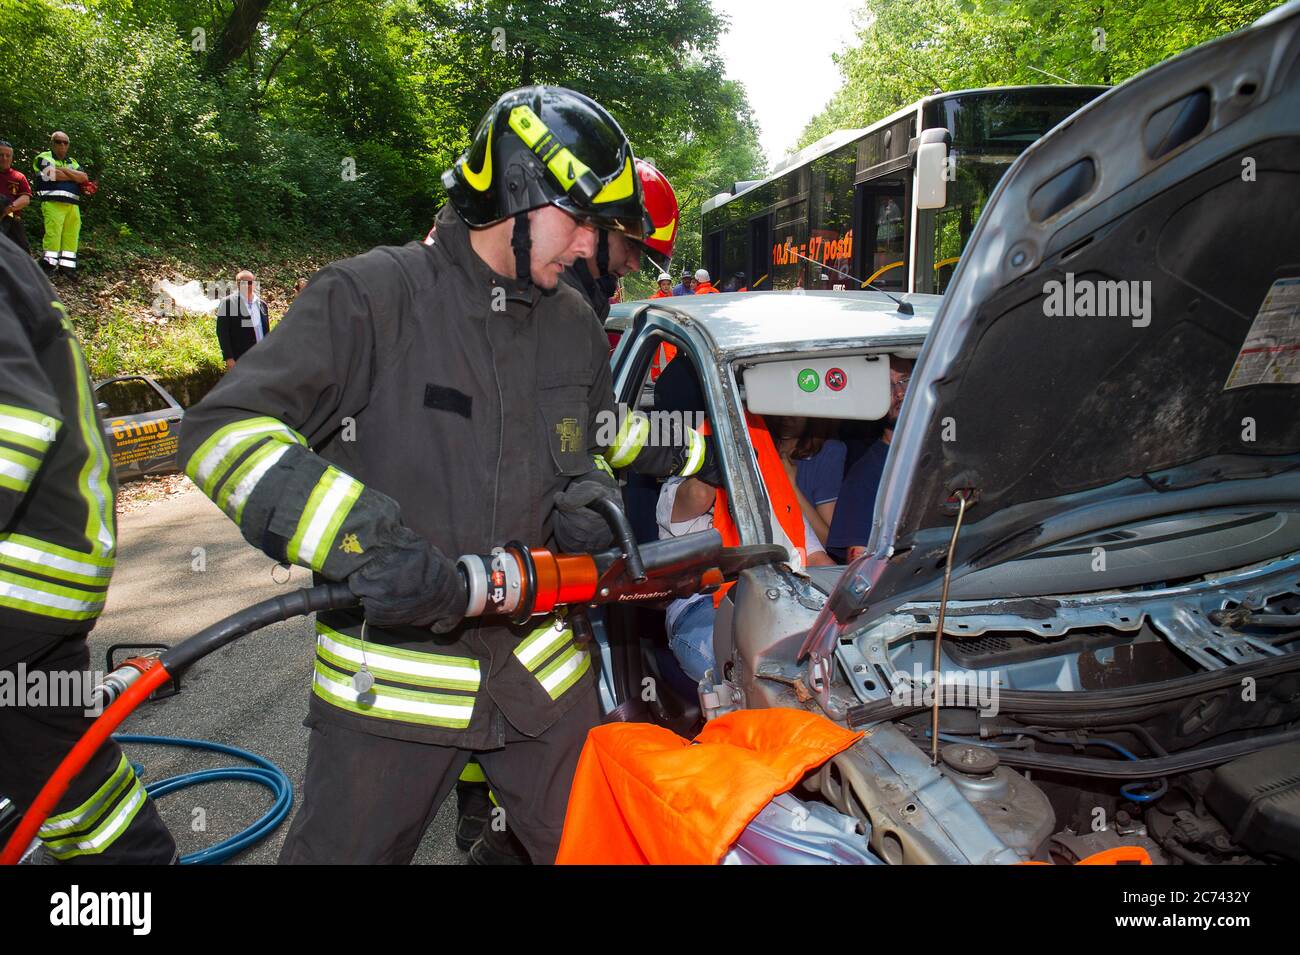 Europe, Italy, Lombardy, Monza. Emerlab Civil Defense Tutorial, Accident Simulation and Use of Equipment. Specifically, the sheet spreader and the hydraulic cutting-off machine to cut car parts and extract the injured person. Stock Photo